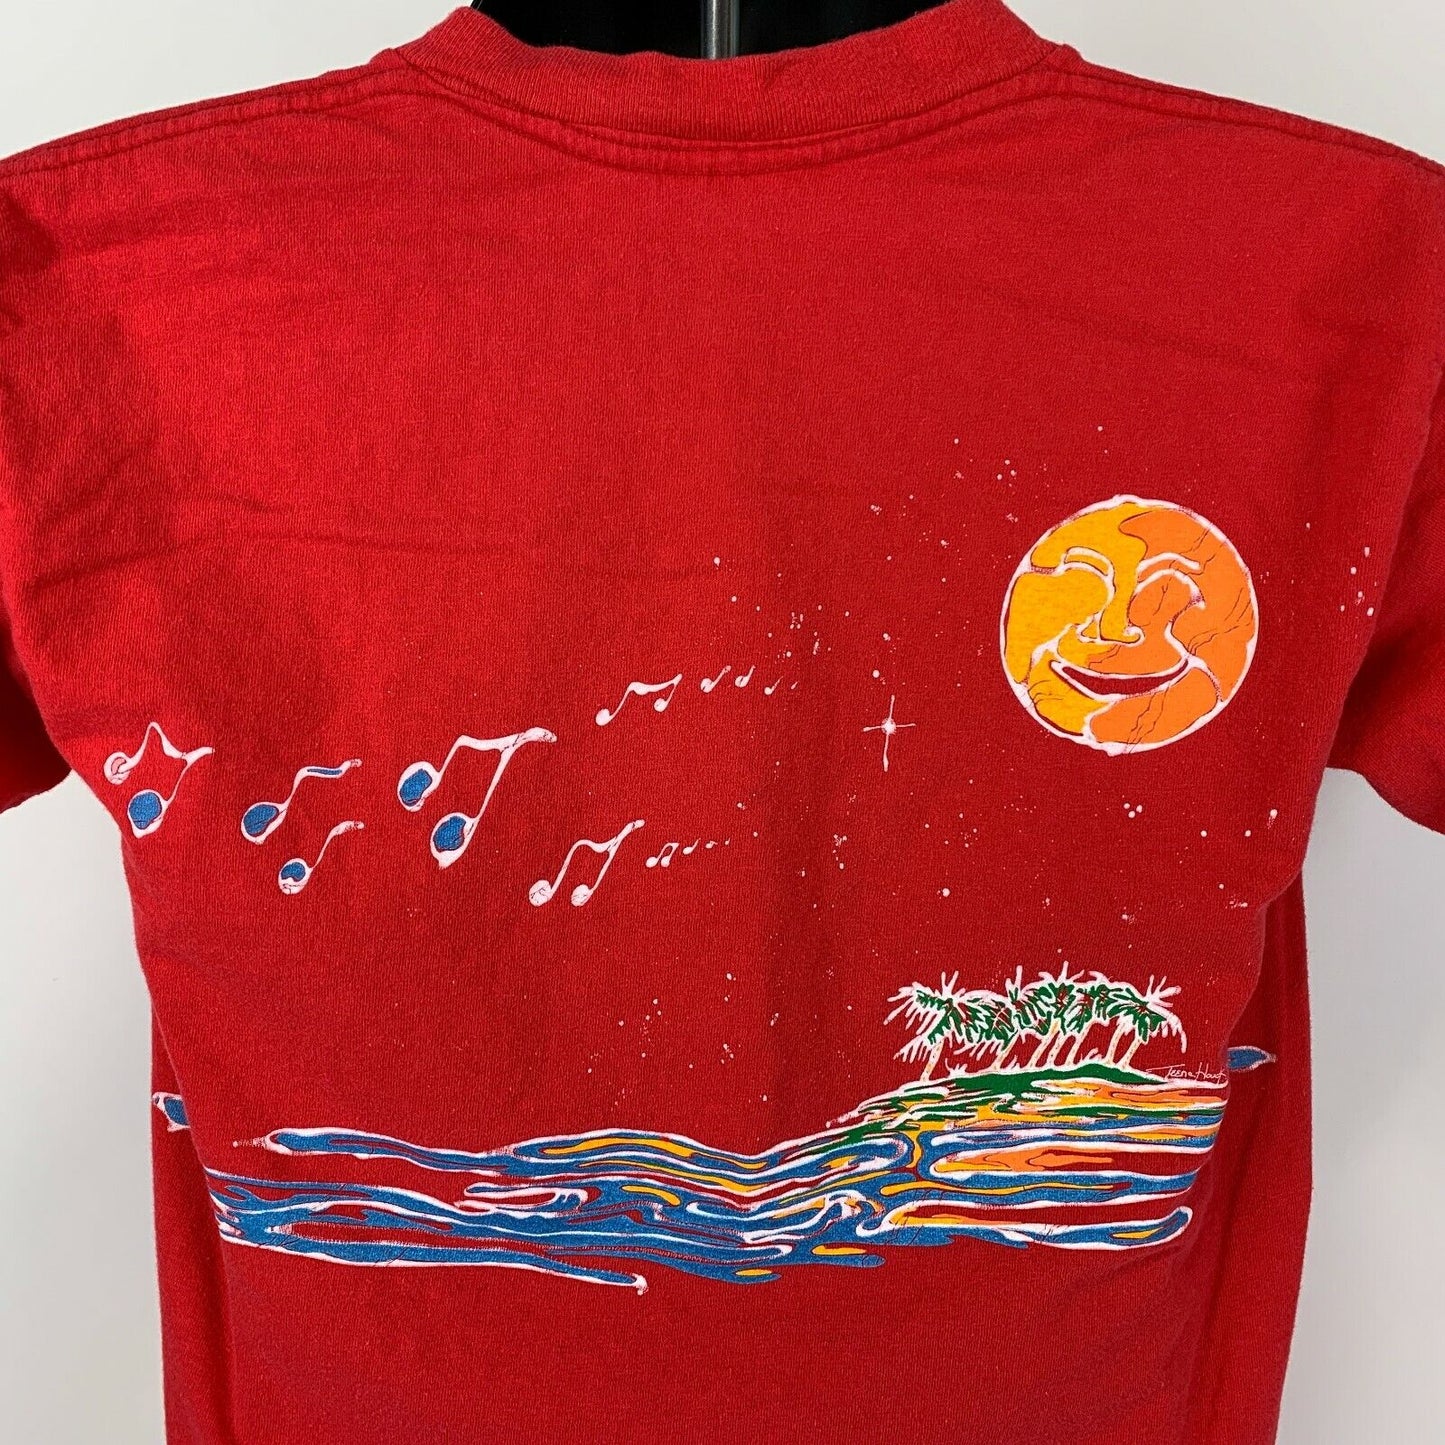 Afro-Caribbean Dolphin Rider Vintage 80s T Shirt Small Jimmy Buffett Mens Red